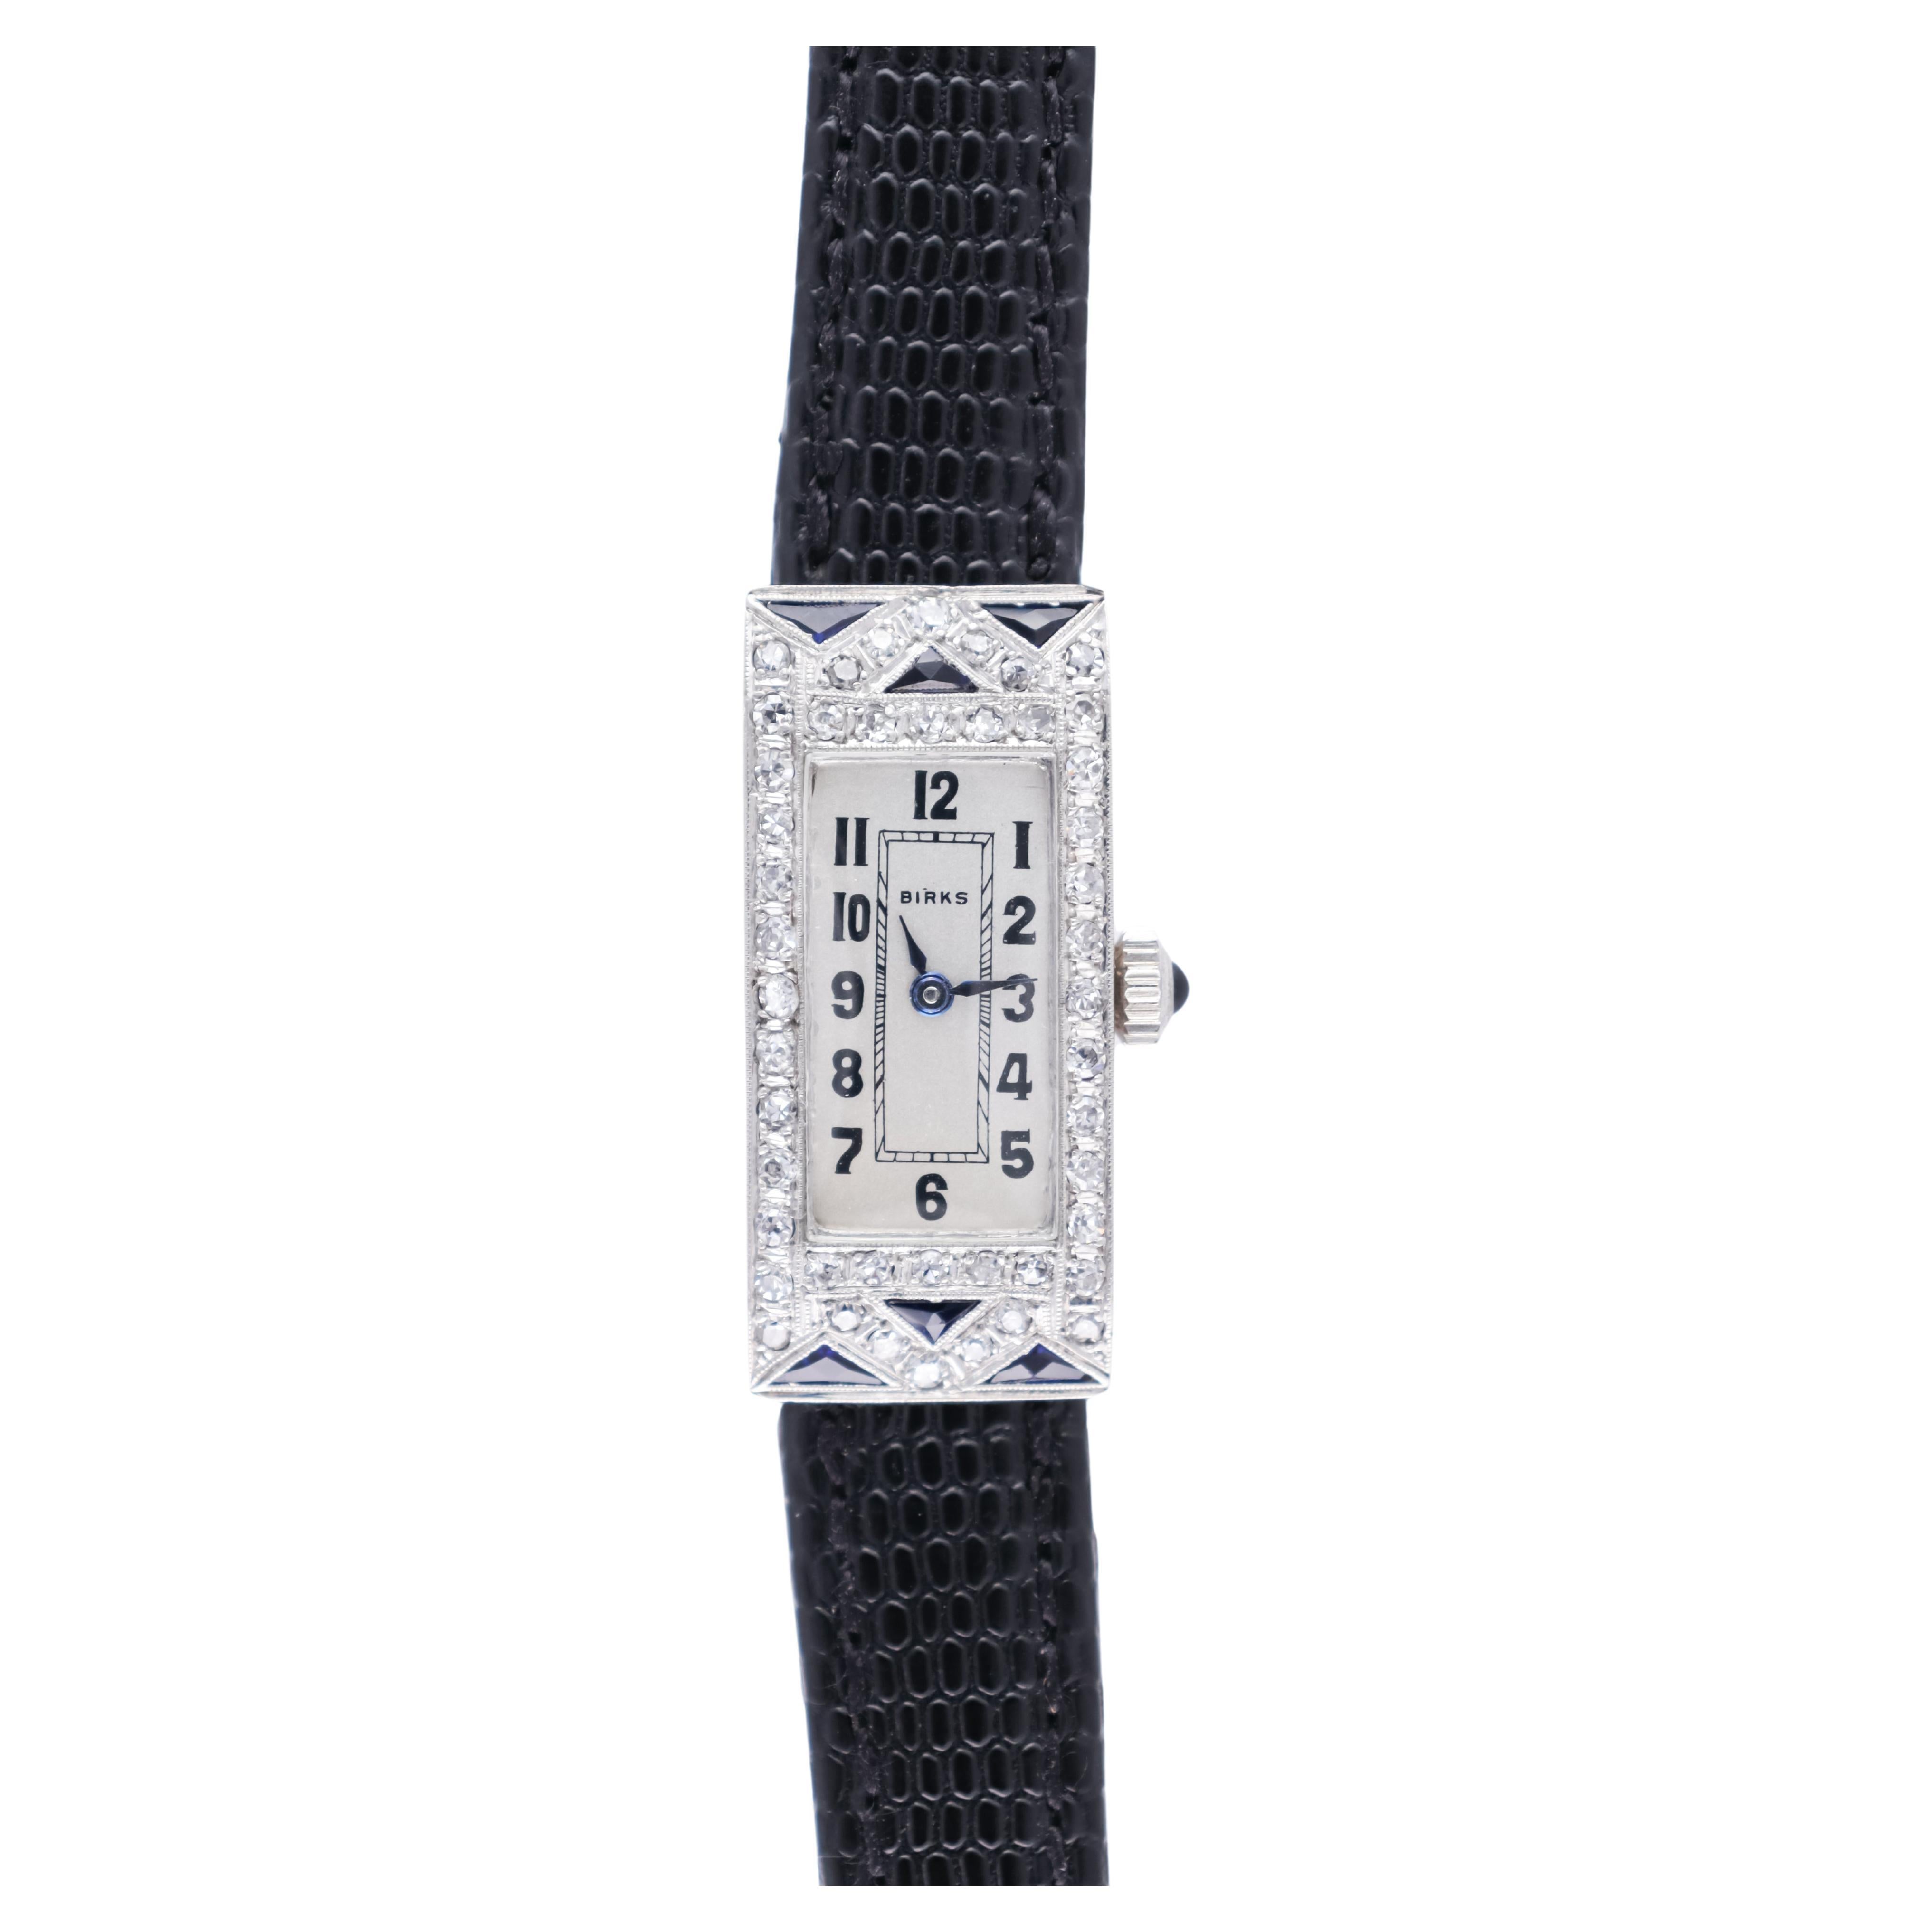 Birks Platinum Art Deco Ladies Diamond and Sapphire Dress Watch from 1940s For Sale 1